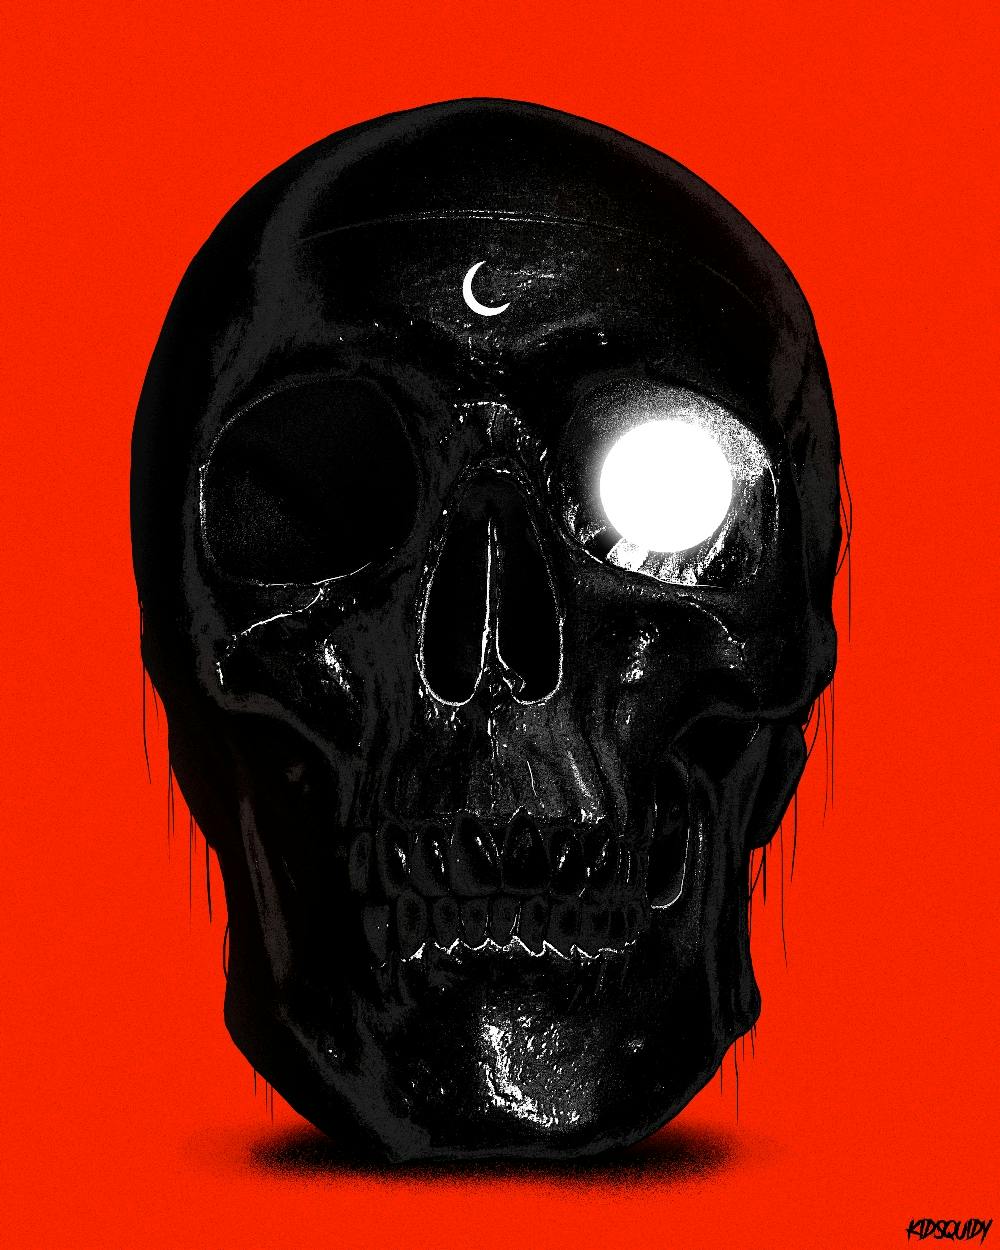 A black skull with a glowing white socket